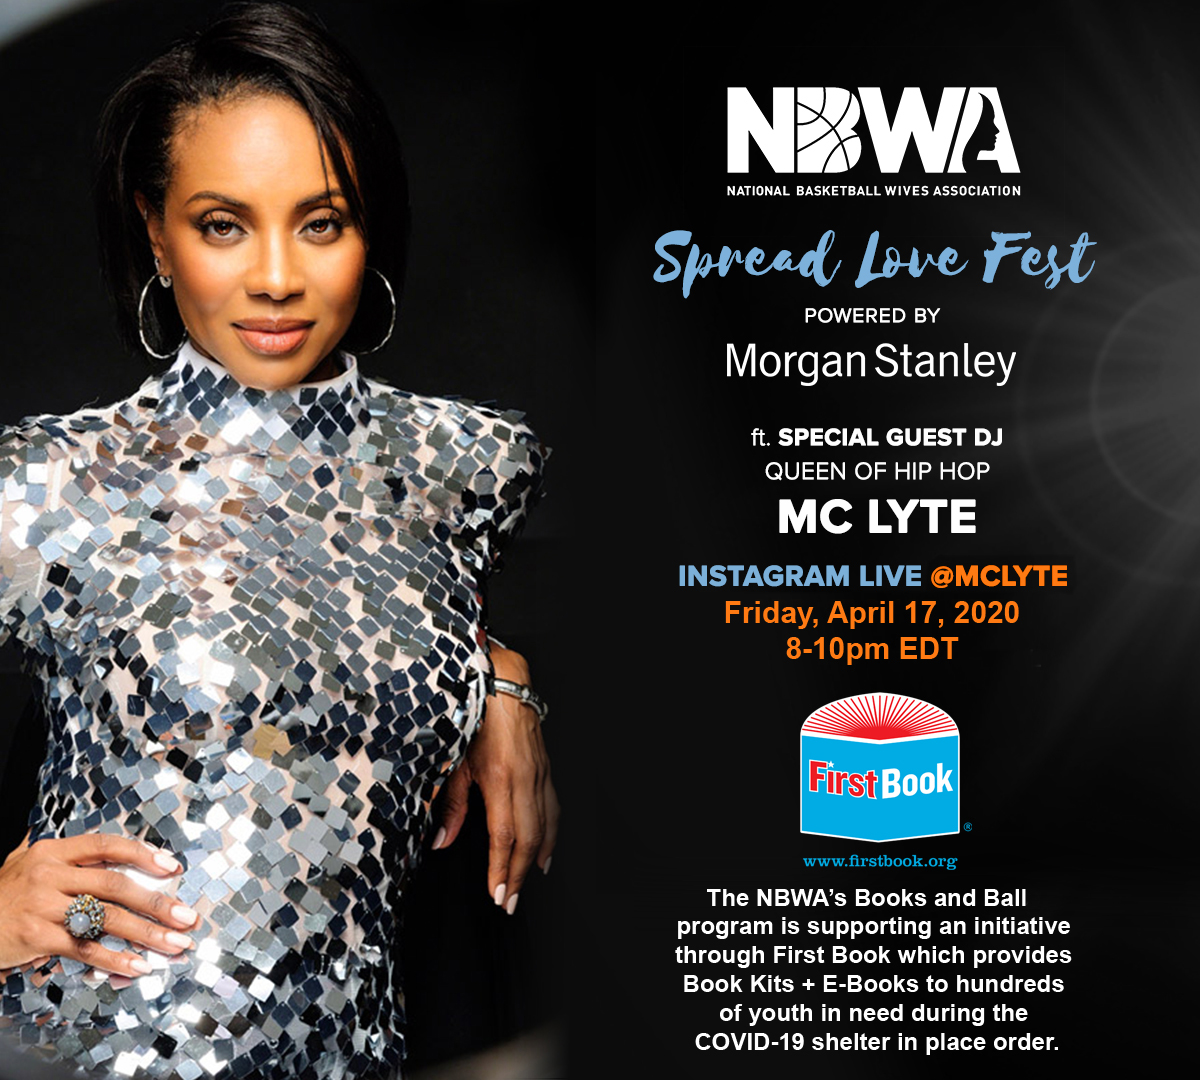 Virtual party with a purpose with MC Lyte powered by NBWA and Morgan Stanley